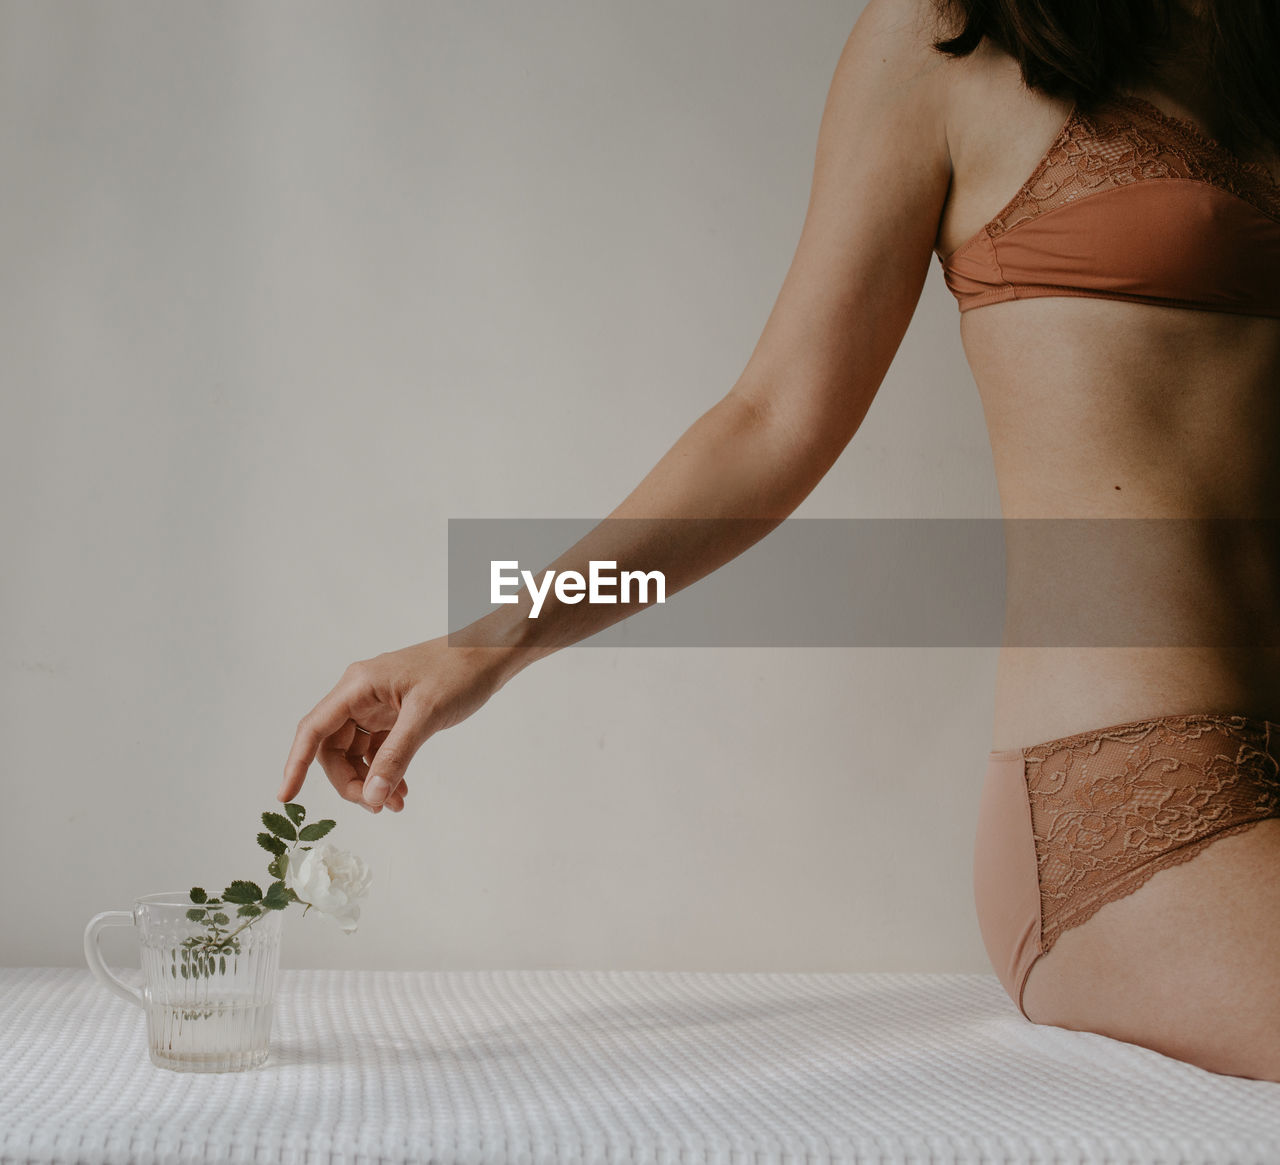 Midsection of sensuous woman wearing lingerie and touching the flower